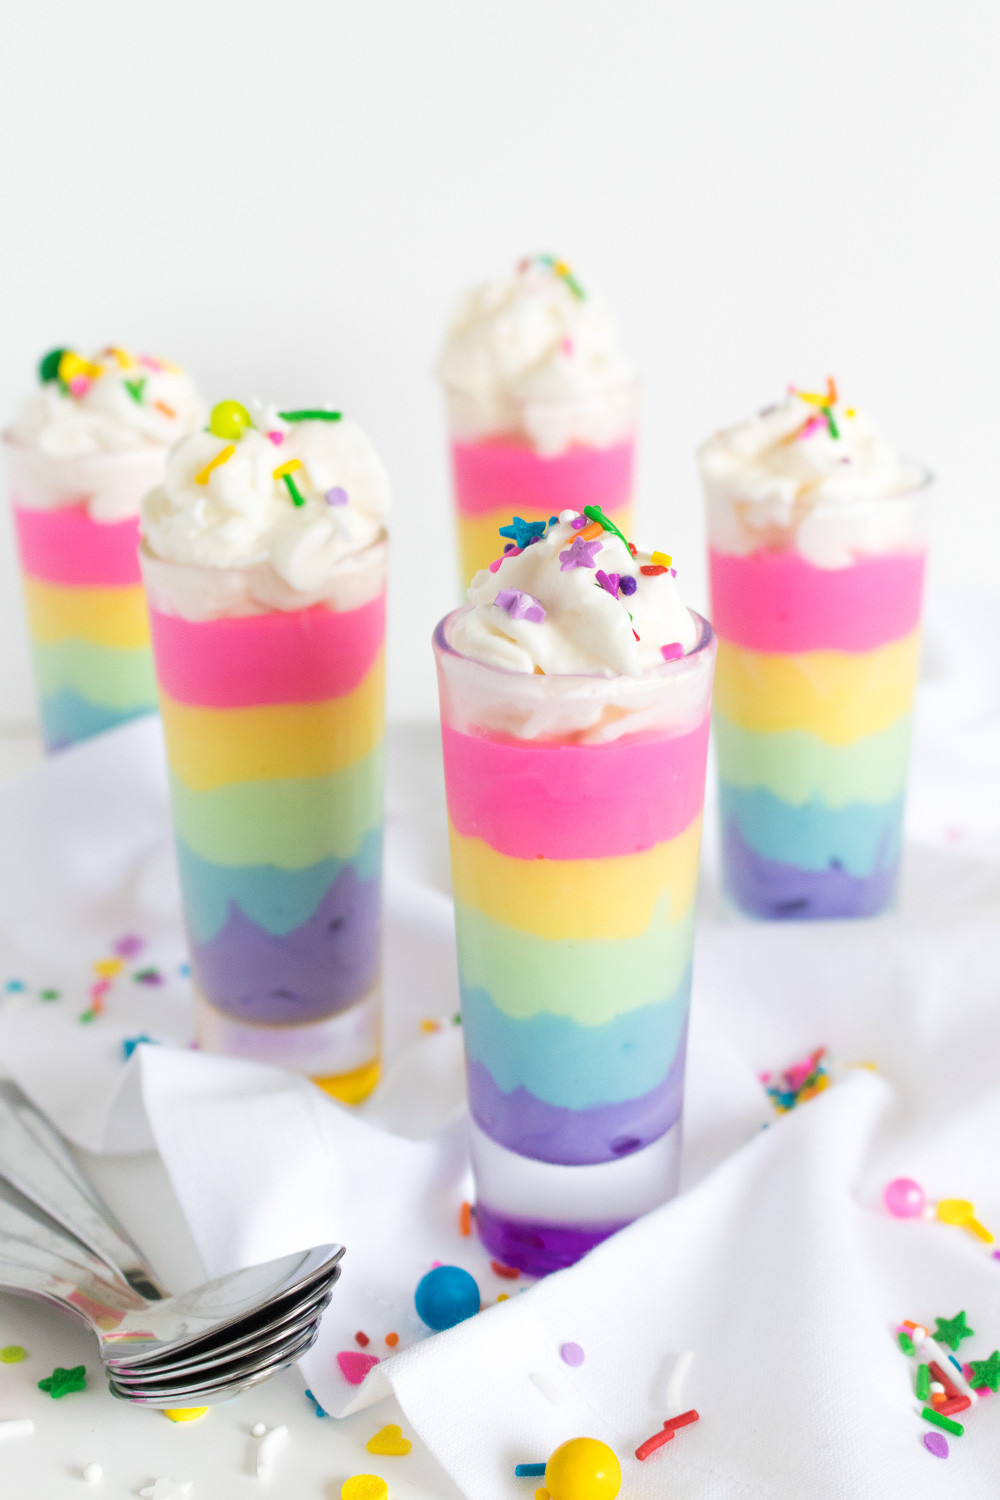 Party Ideas Unicorn Food Glass
 Totally Perfect Unicorn Party Food Ideas